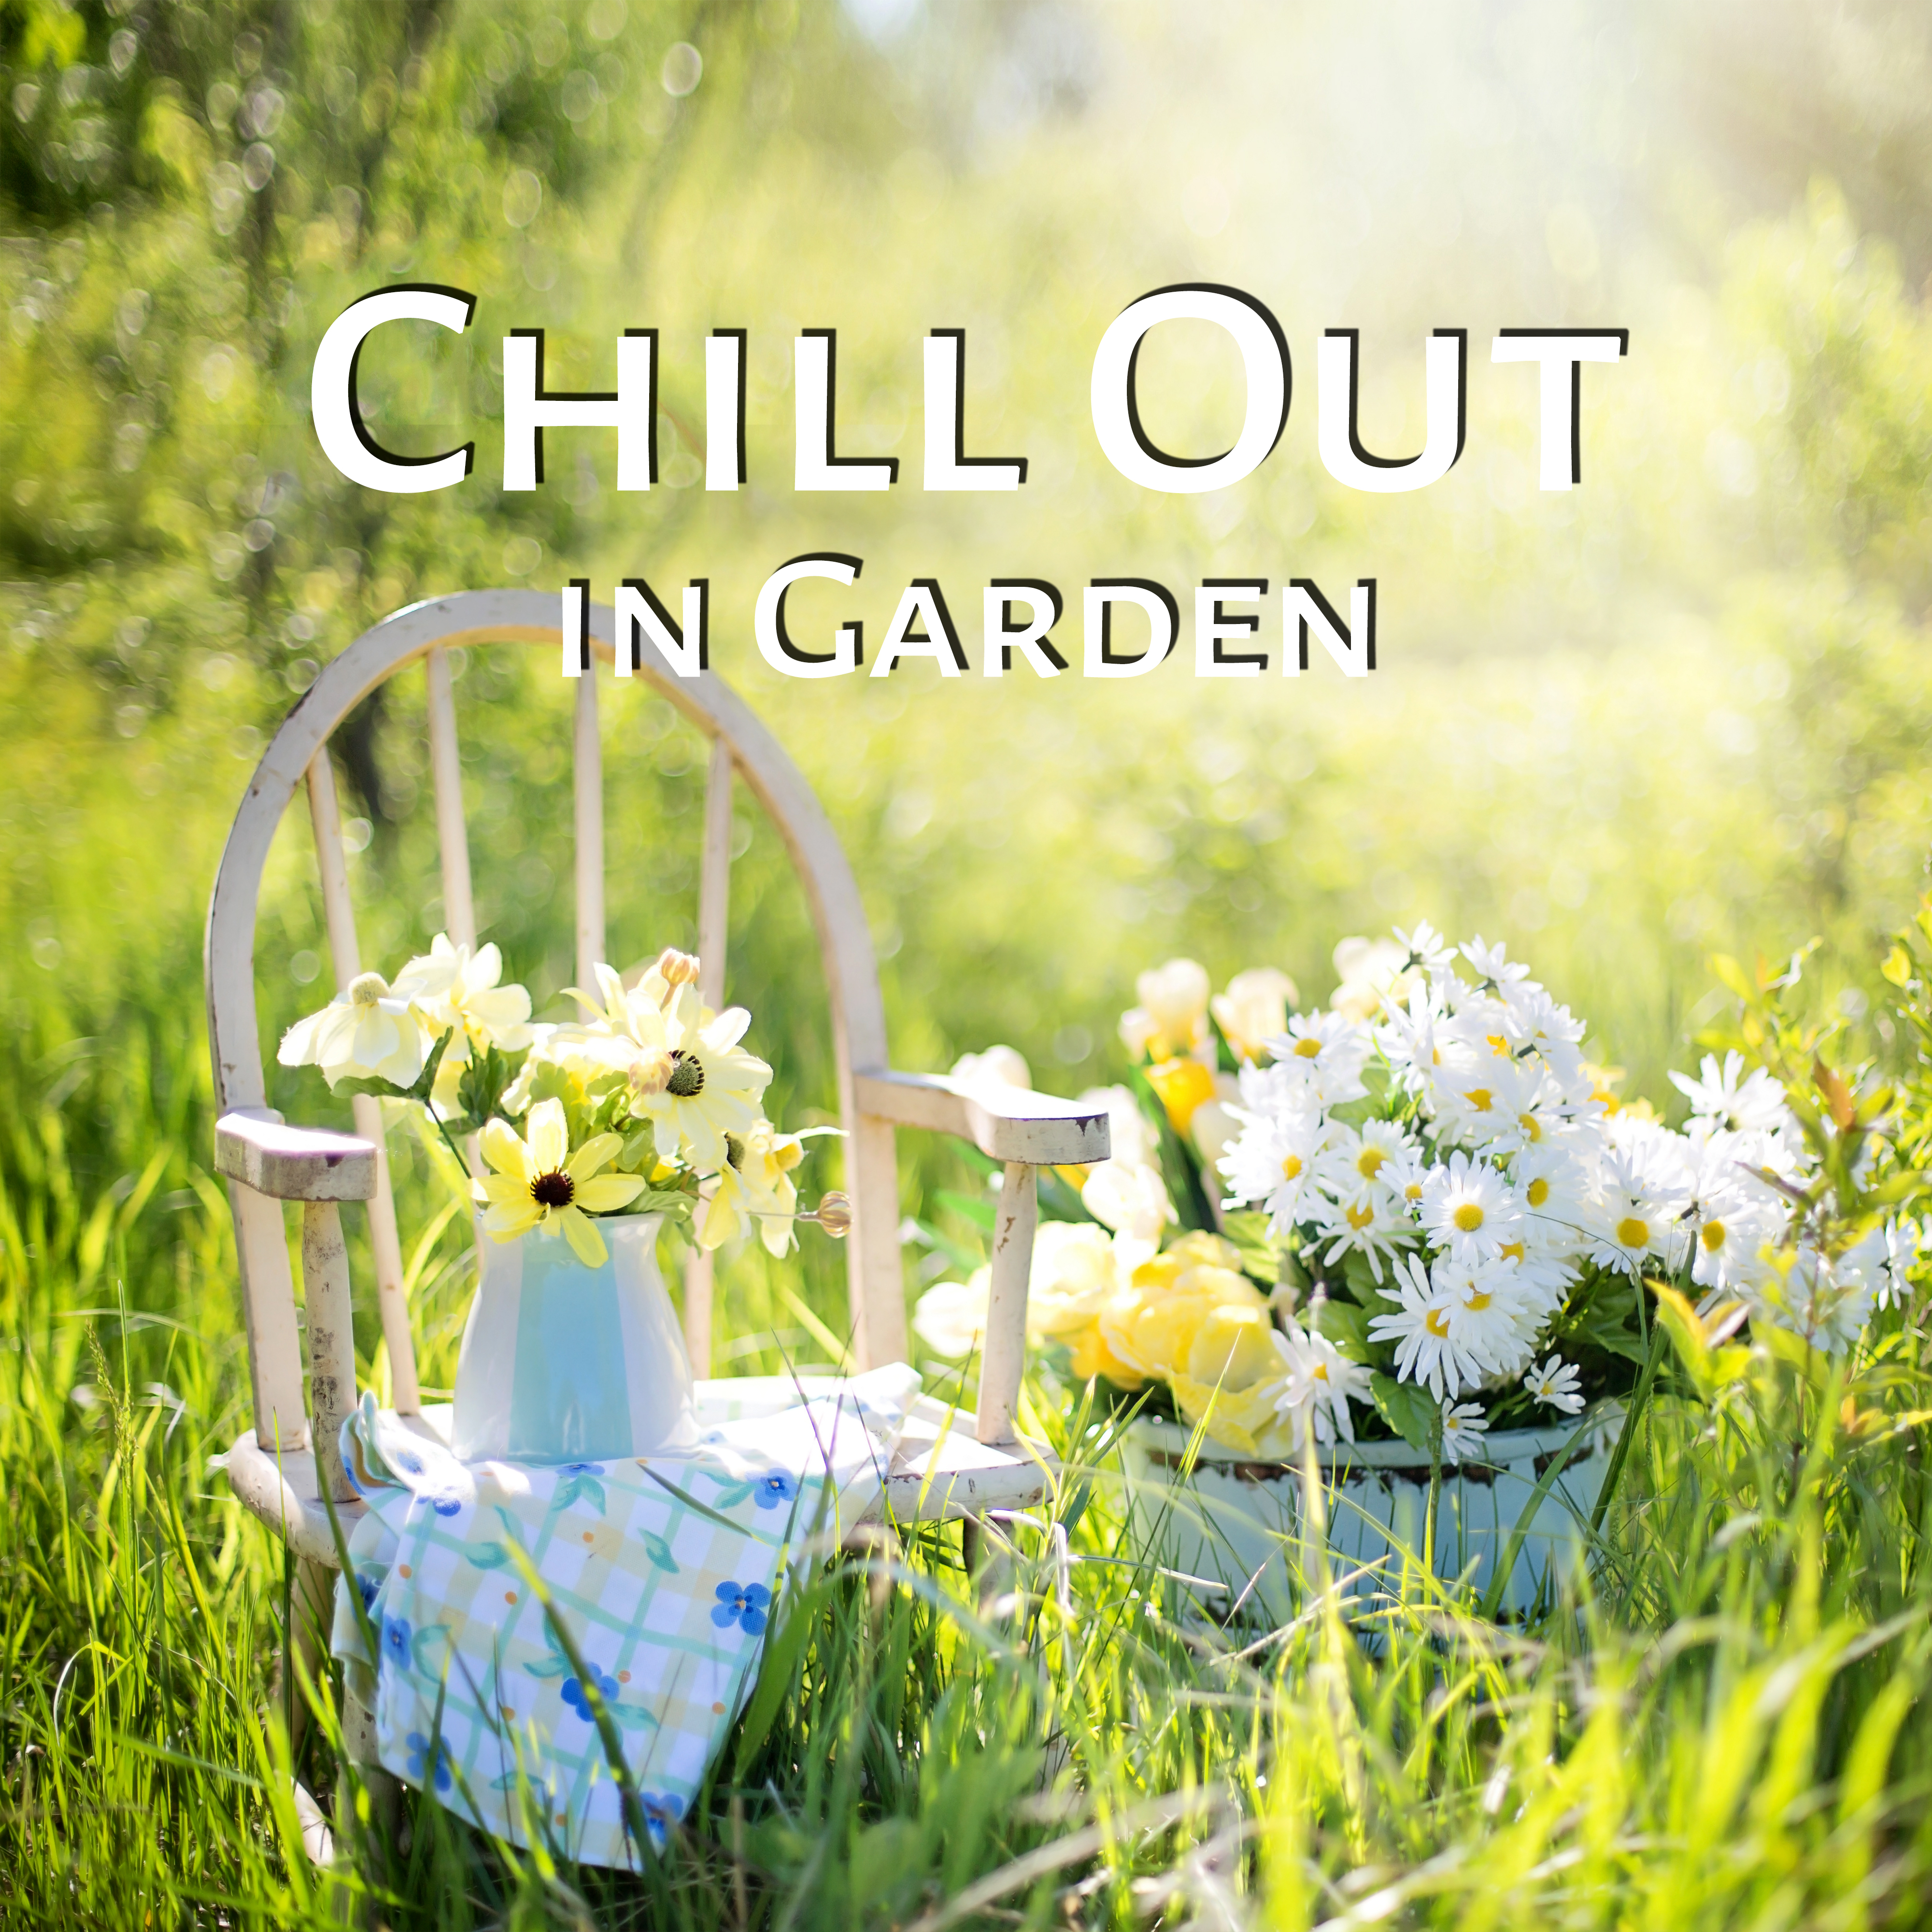 Chill Out in Garden – Electronic Music Ambient for Relaxation, Easy Listening, Positive Thinking, Chill Sounds Therapy